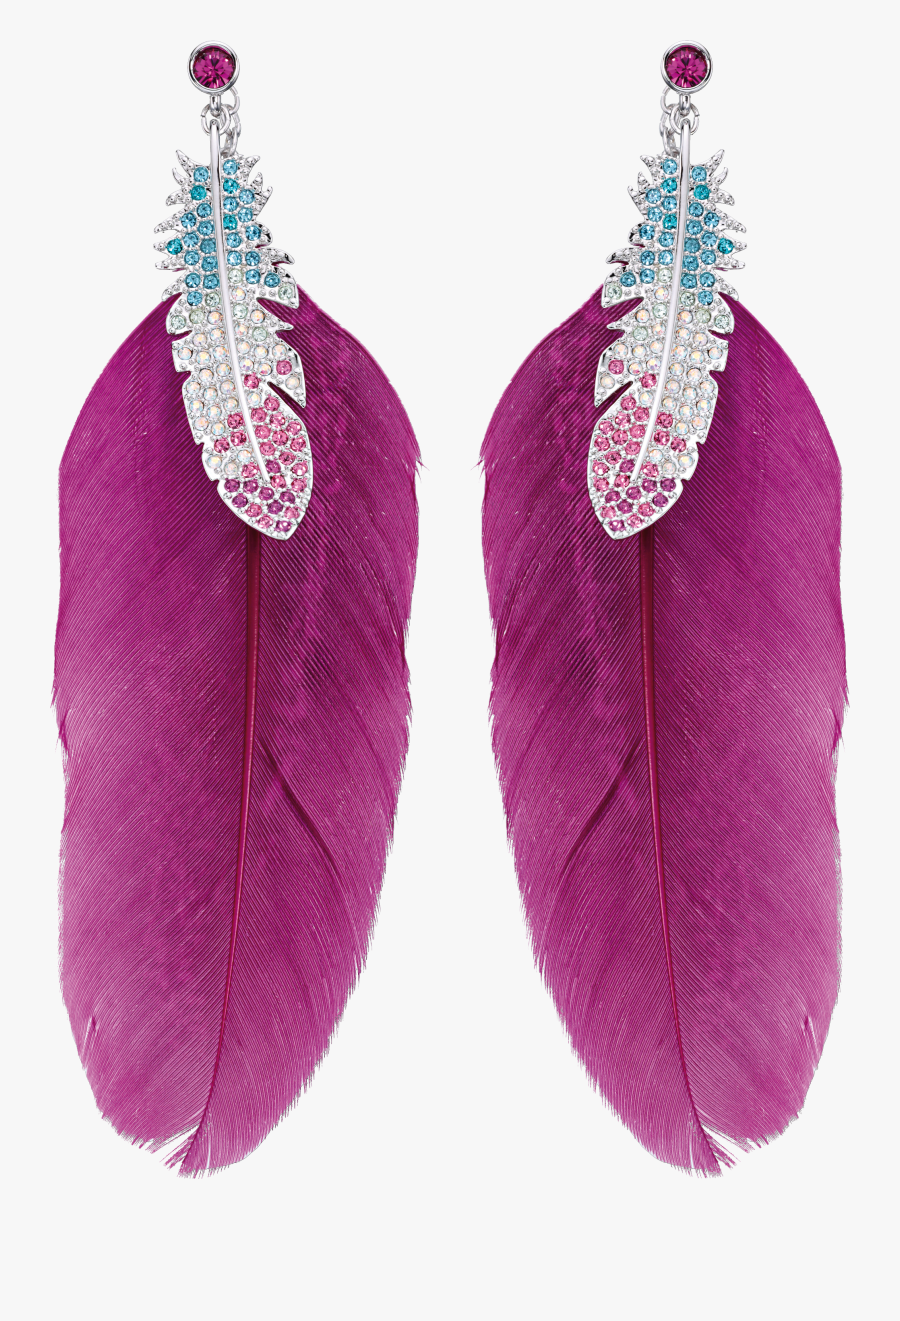 Feather Earrings Png Image - Earrings Transparent Background, Transparent Clipart